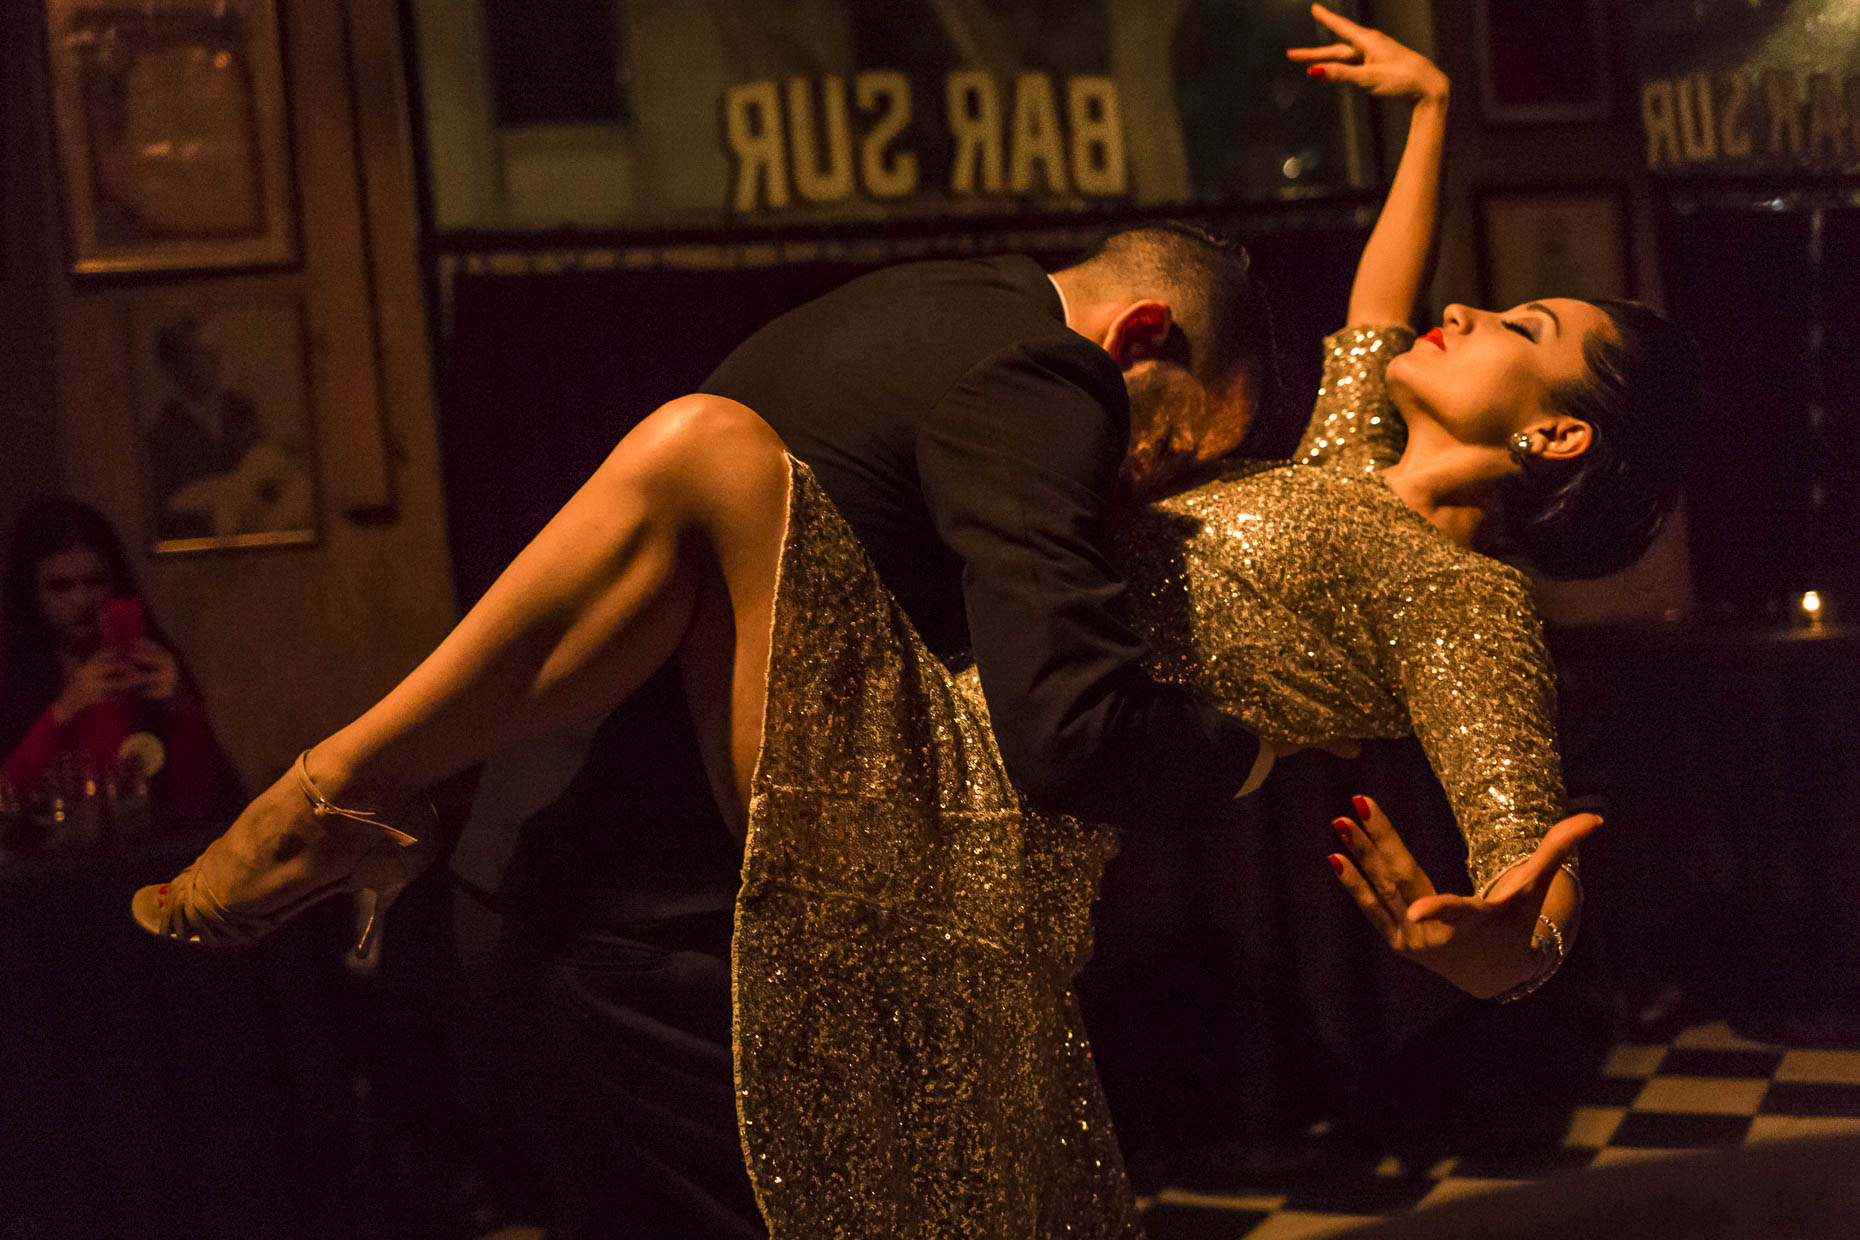 Tango dancers during a live performance in bar.